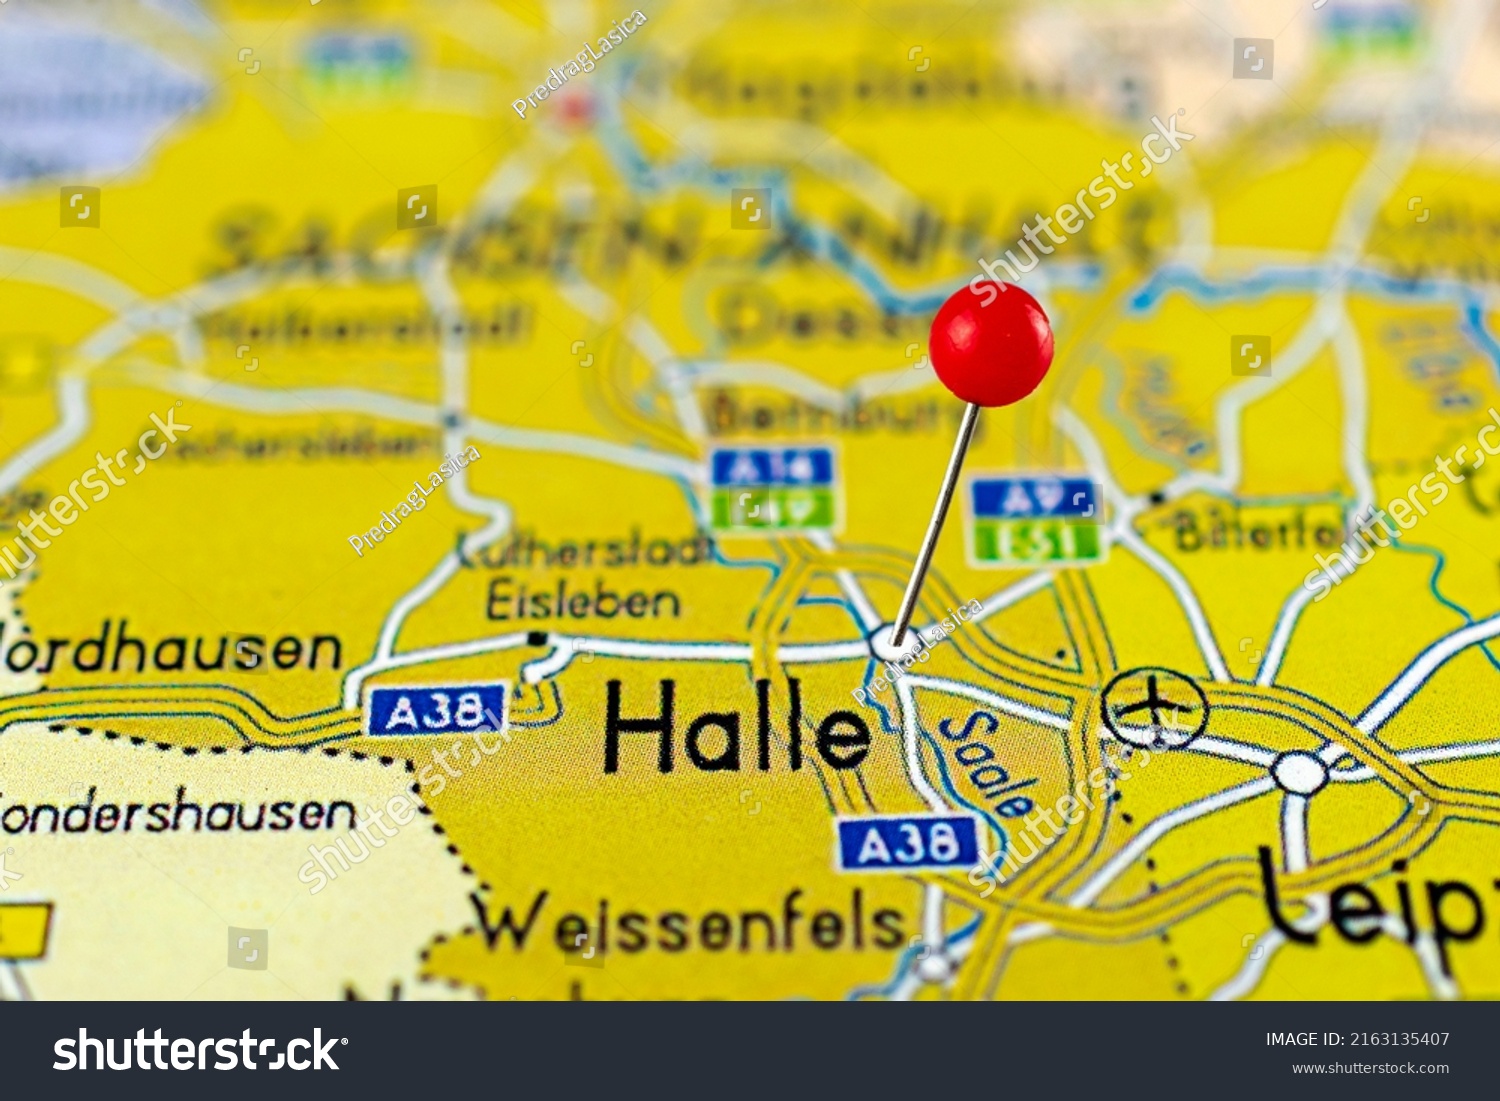 Stock Photo Halle Pinned On A Map Of Germany Map With Red Pin Point Of Halle In Germany 2163135407 